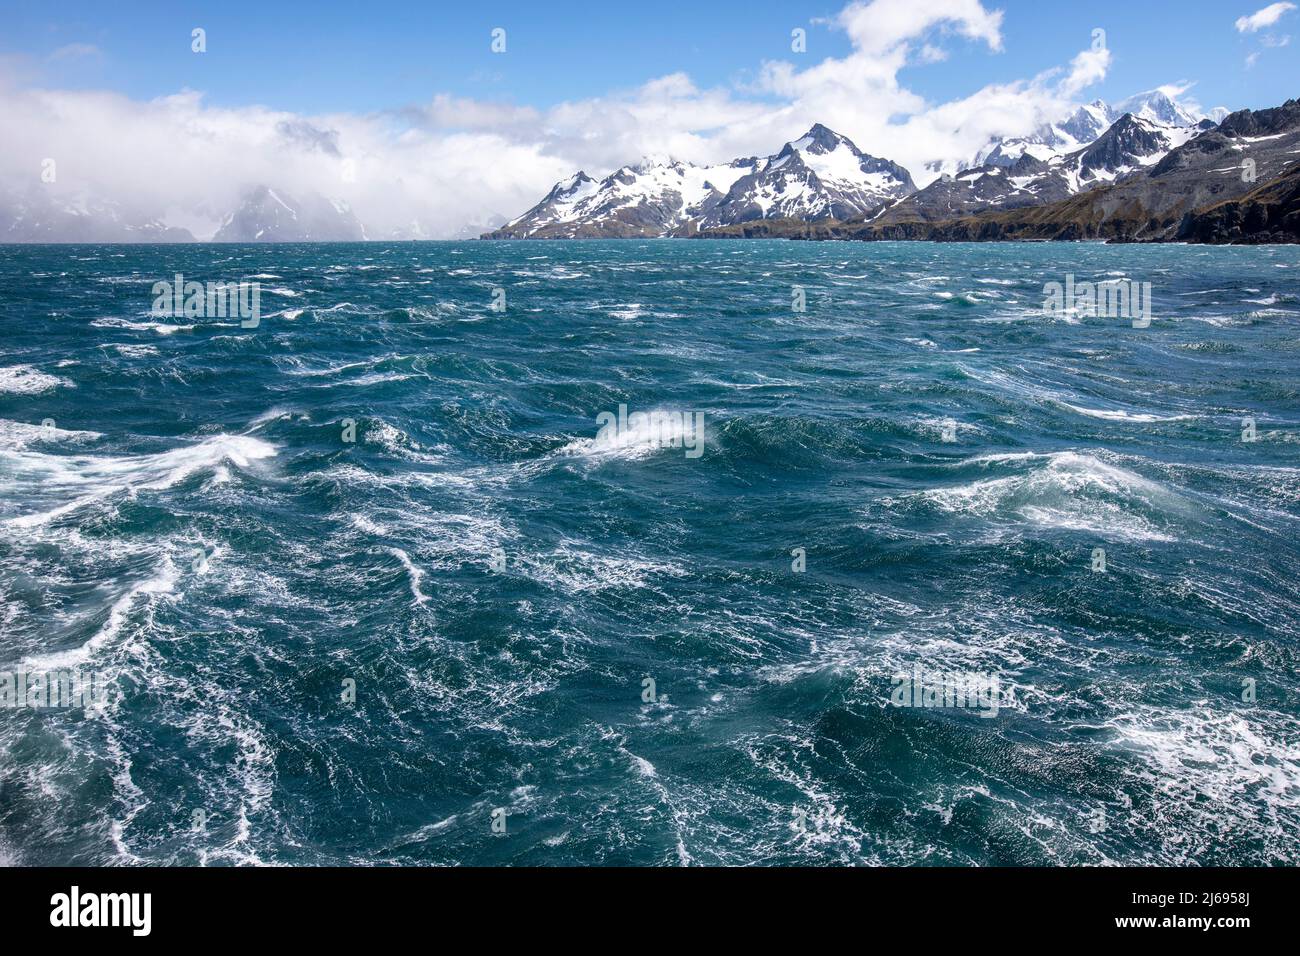 A view of snow-capped mountains and glaciers in Cooper Bay, South Georgia, South Atlantic, Polar Regions Stock Photo